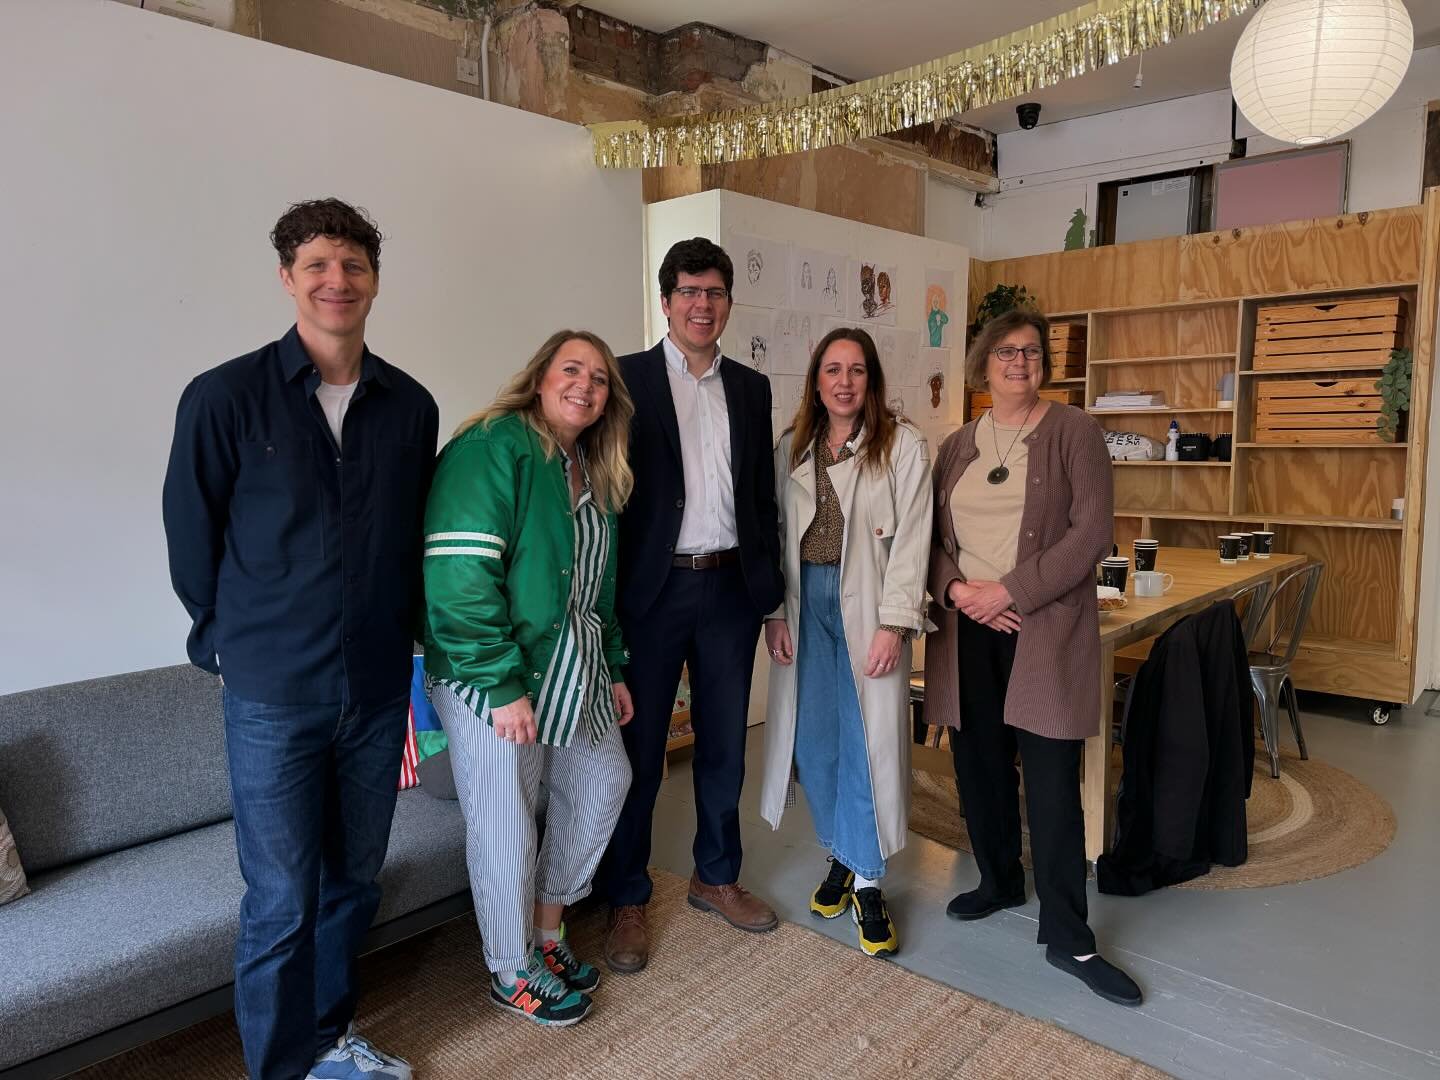 💫Welcoming our local councillors Leonora Thomson, Caro Wild &amp; Huw Thomas to our new studio space! 💫
It was a pleasure to give them a tour of our new ground floor, music venue, and introduce them to our amazing studio members. Together, we are e